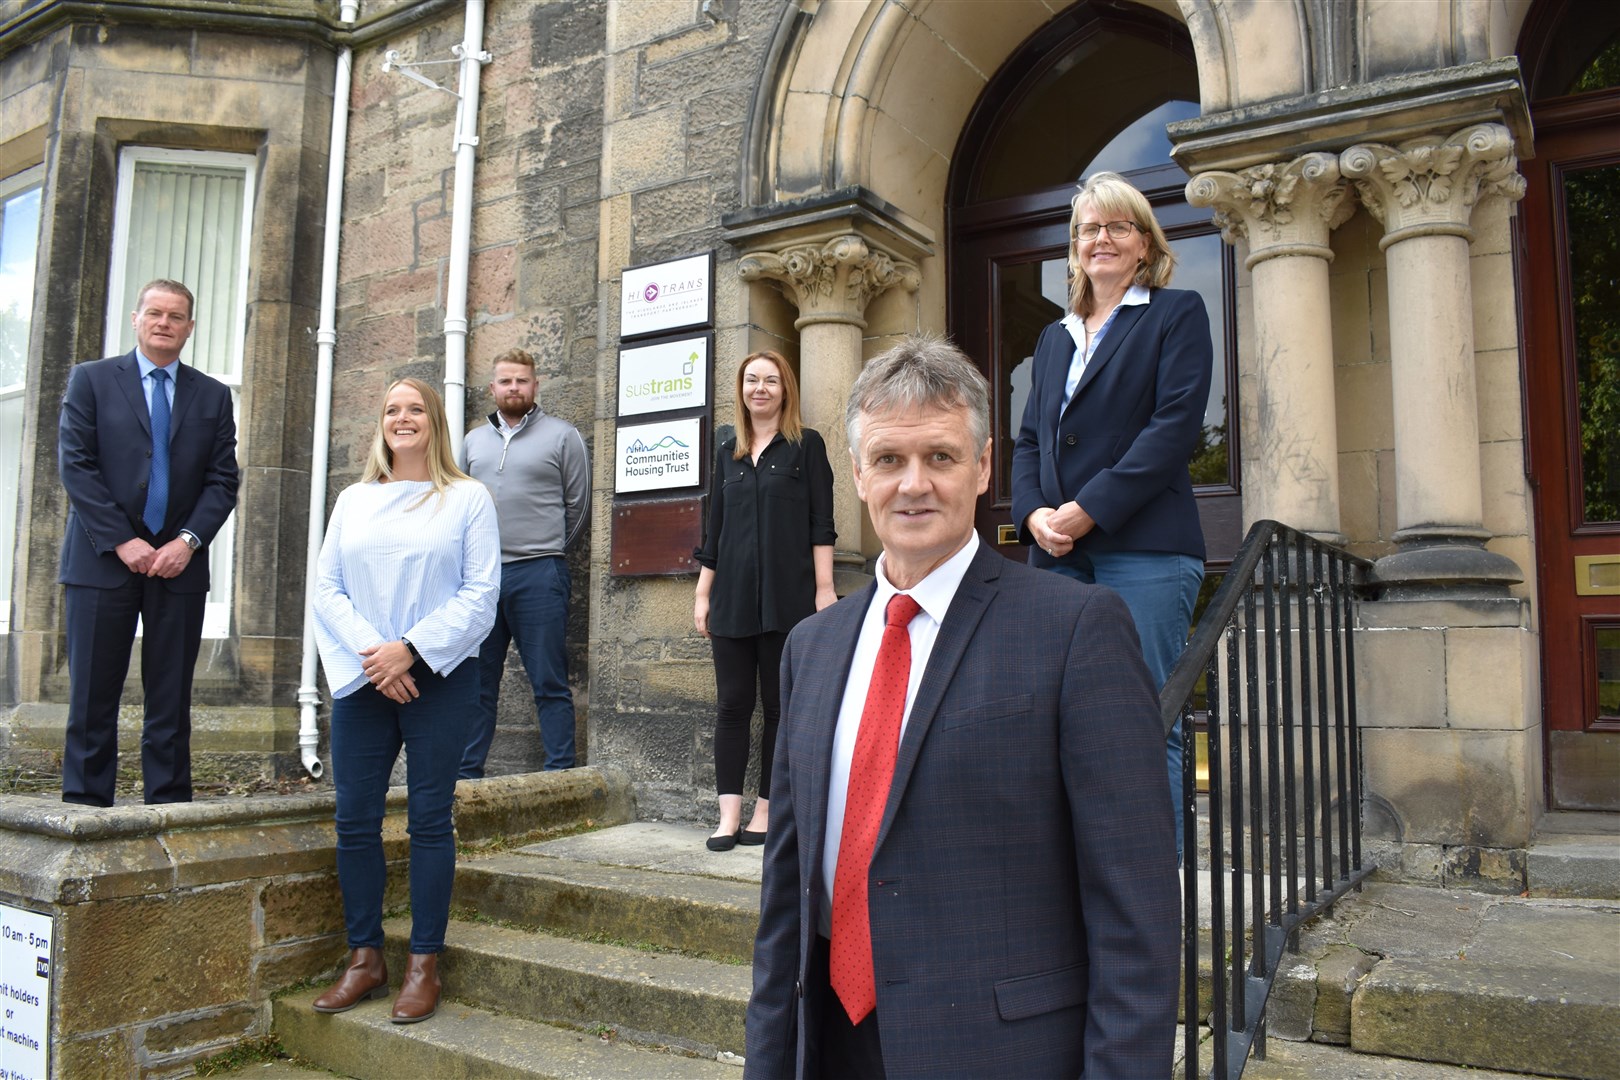 Chief executive Ronnie Macrae and other members of the CHT team outside their Inverness headquarters.